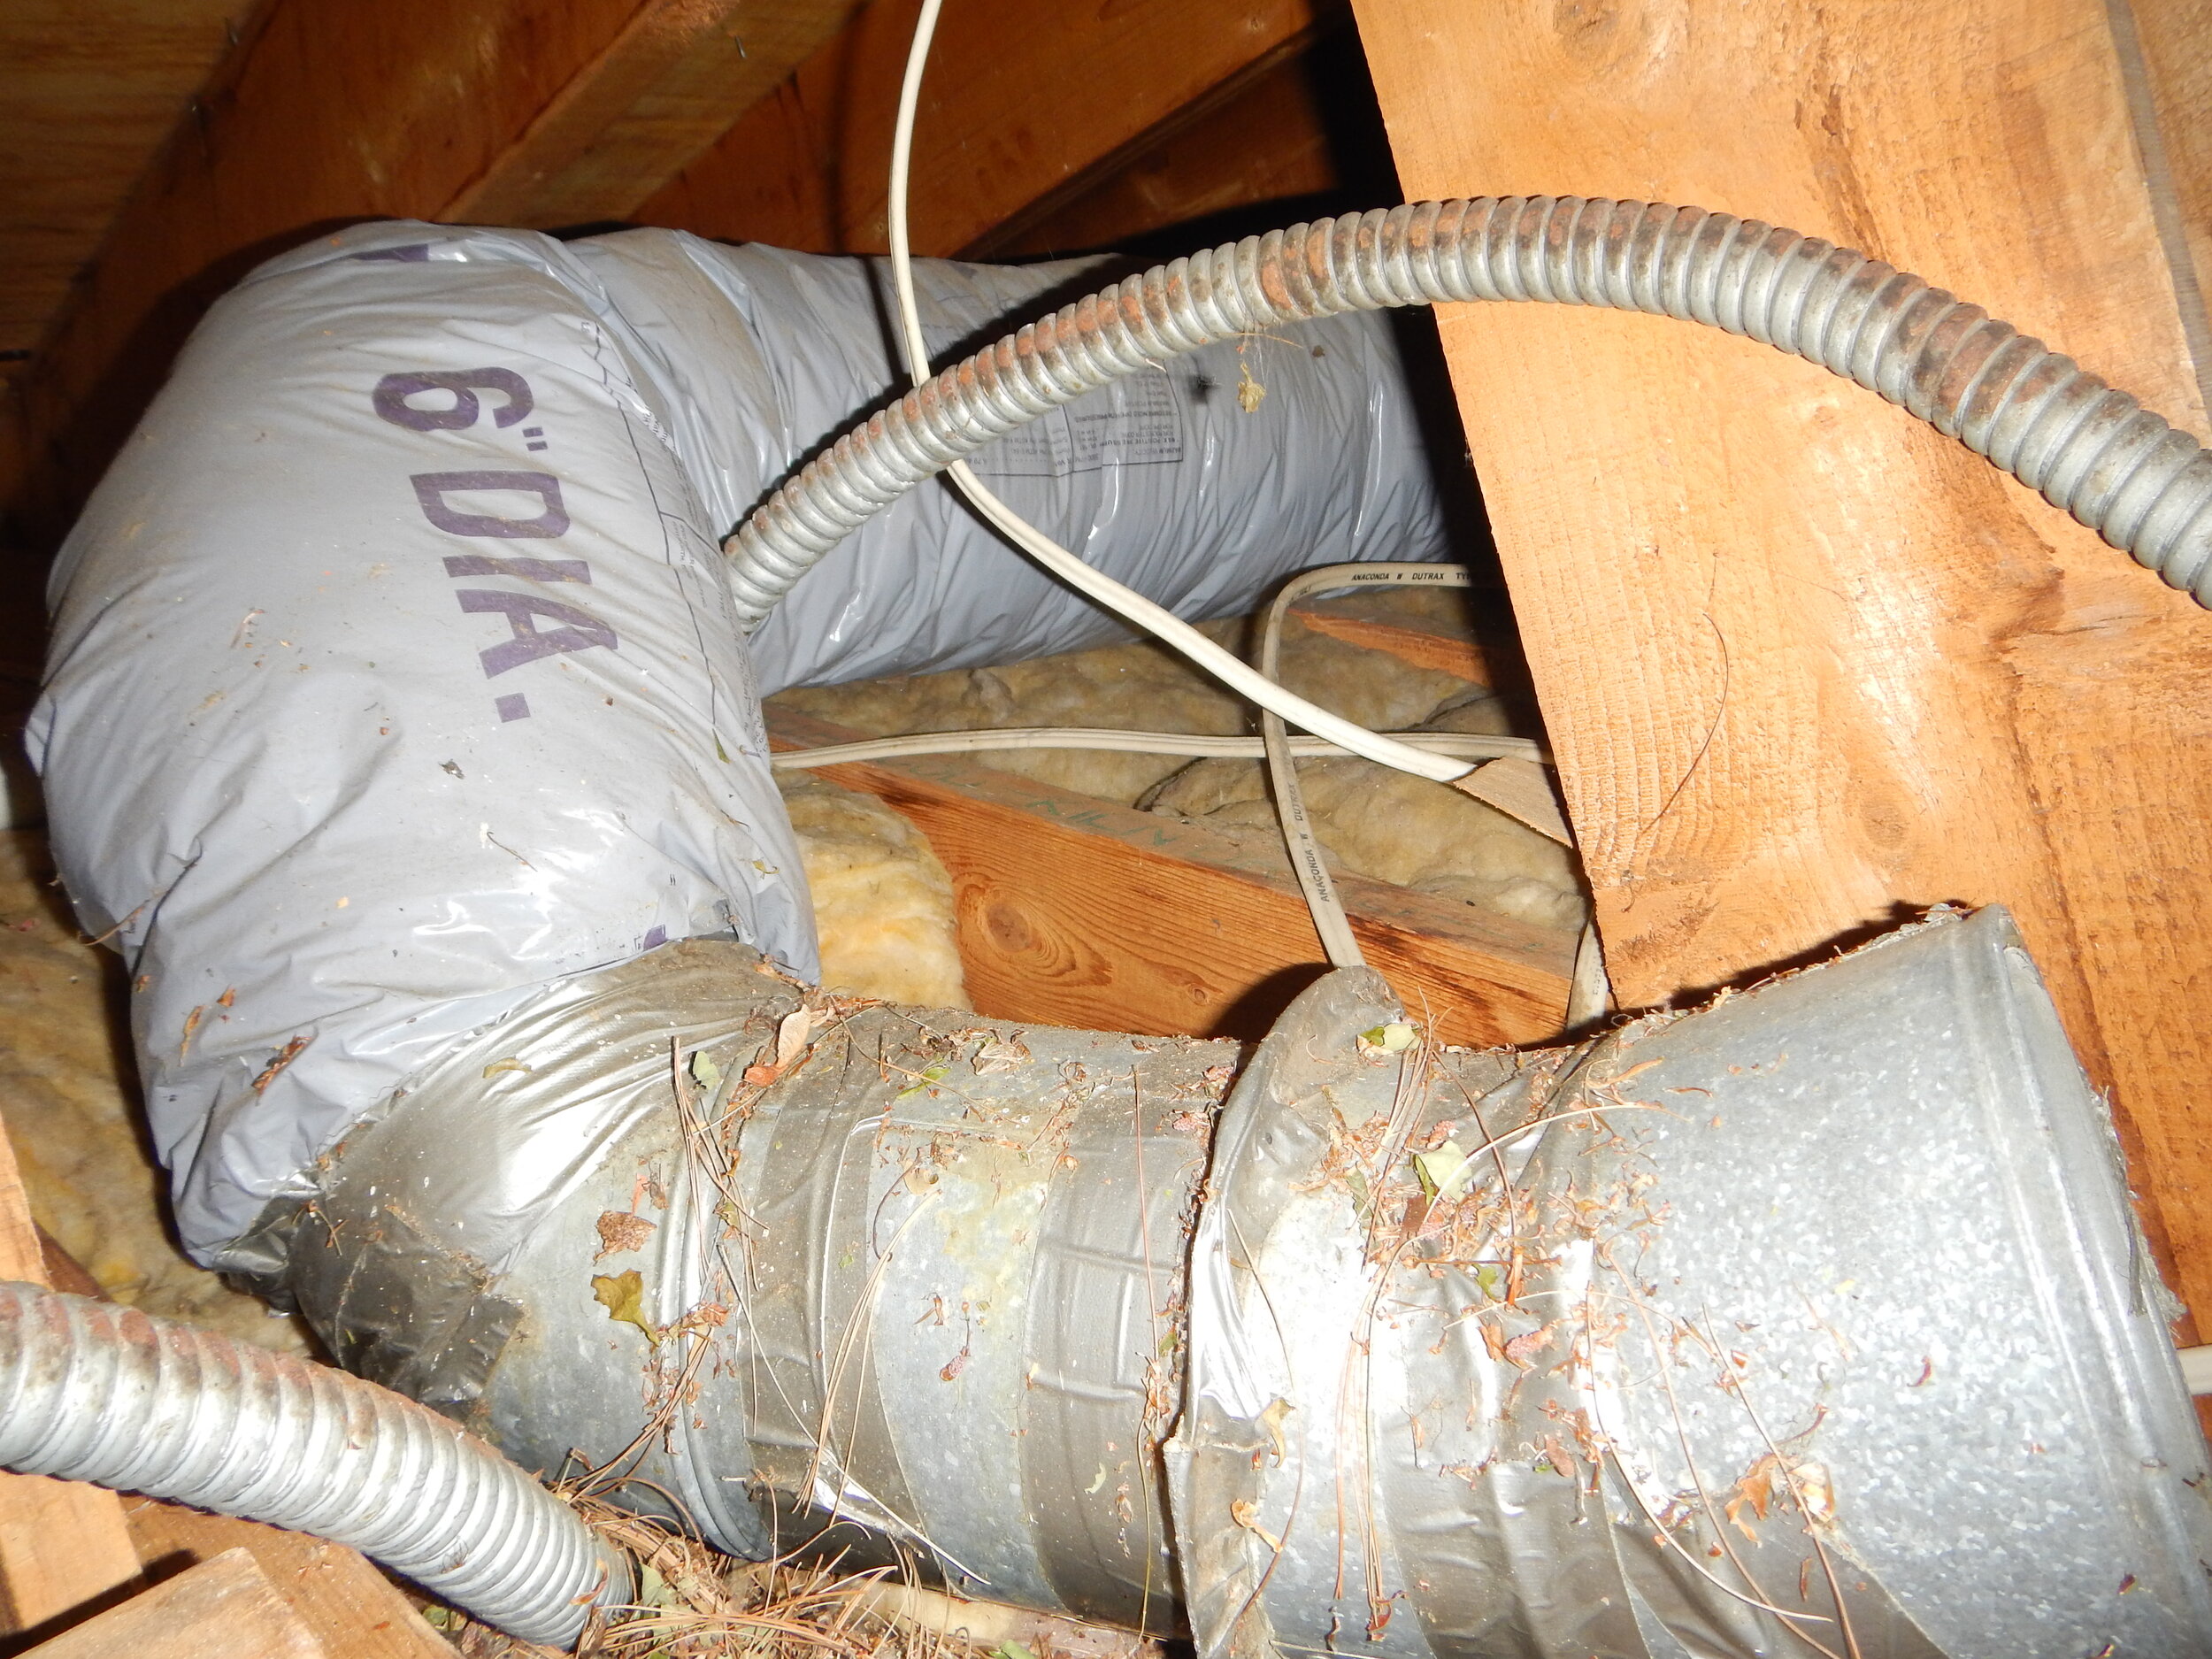 Improperly Insulated Ducts in Attic; Signs of Rodents